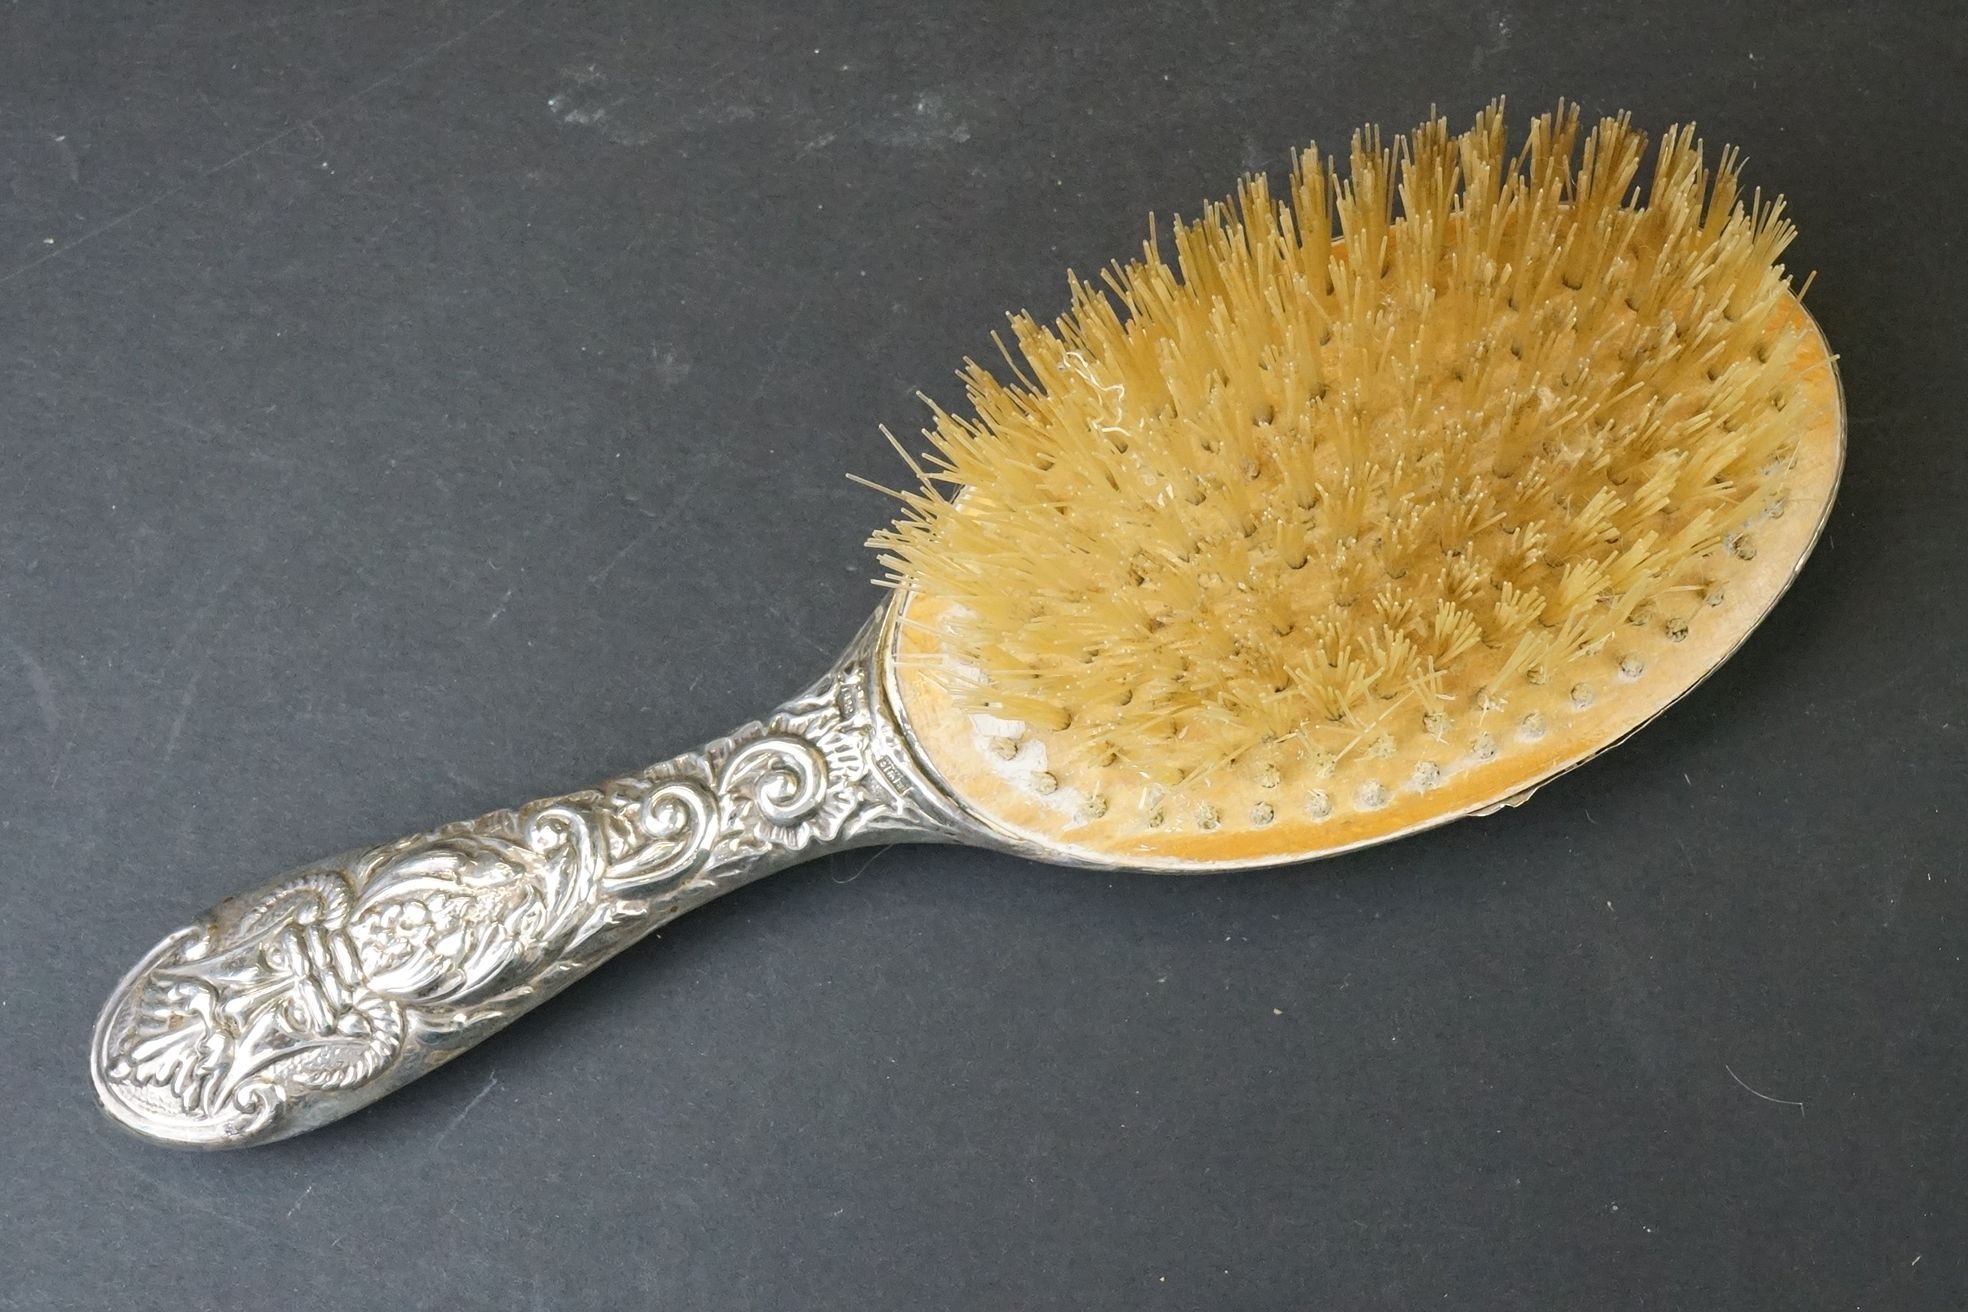 Mid 20th C silver mounted four-piece dressing table brush set with repousse Gothic-style decoration, - Image 4 of 7